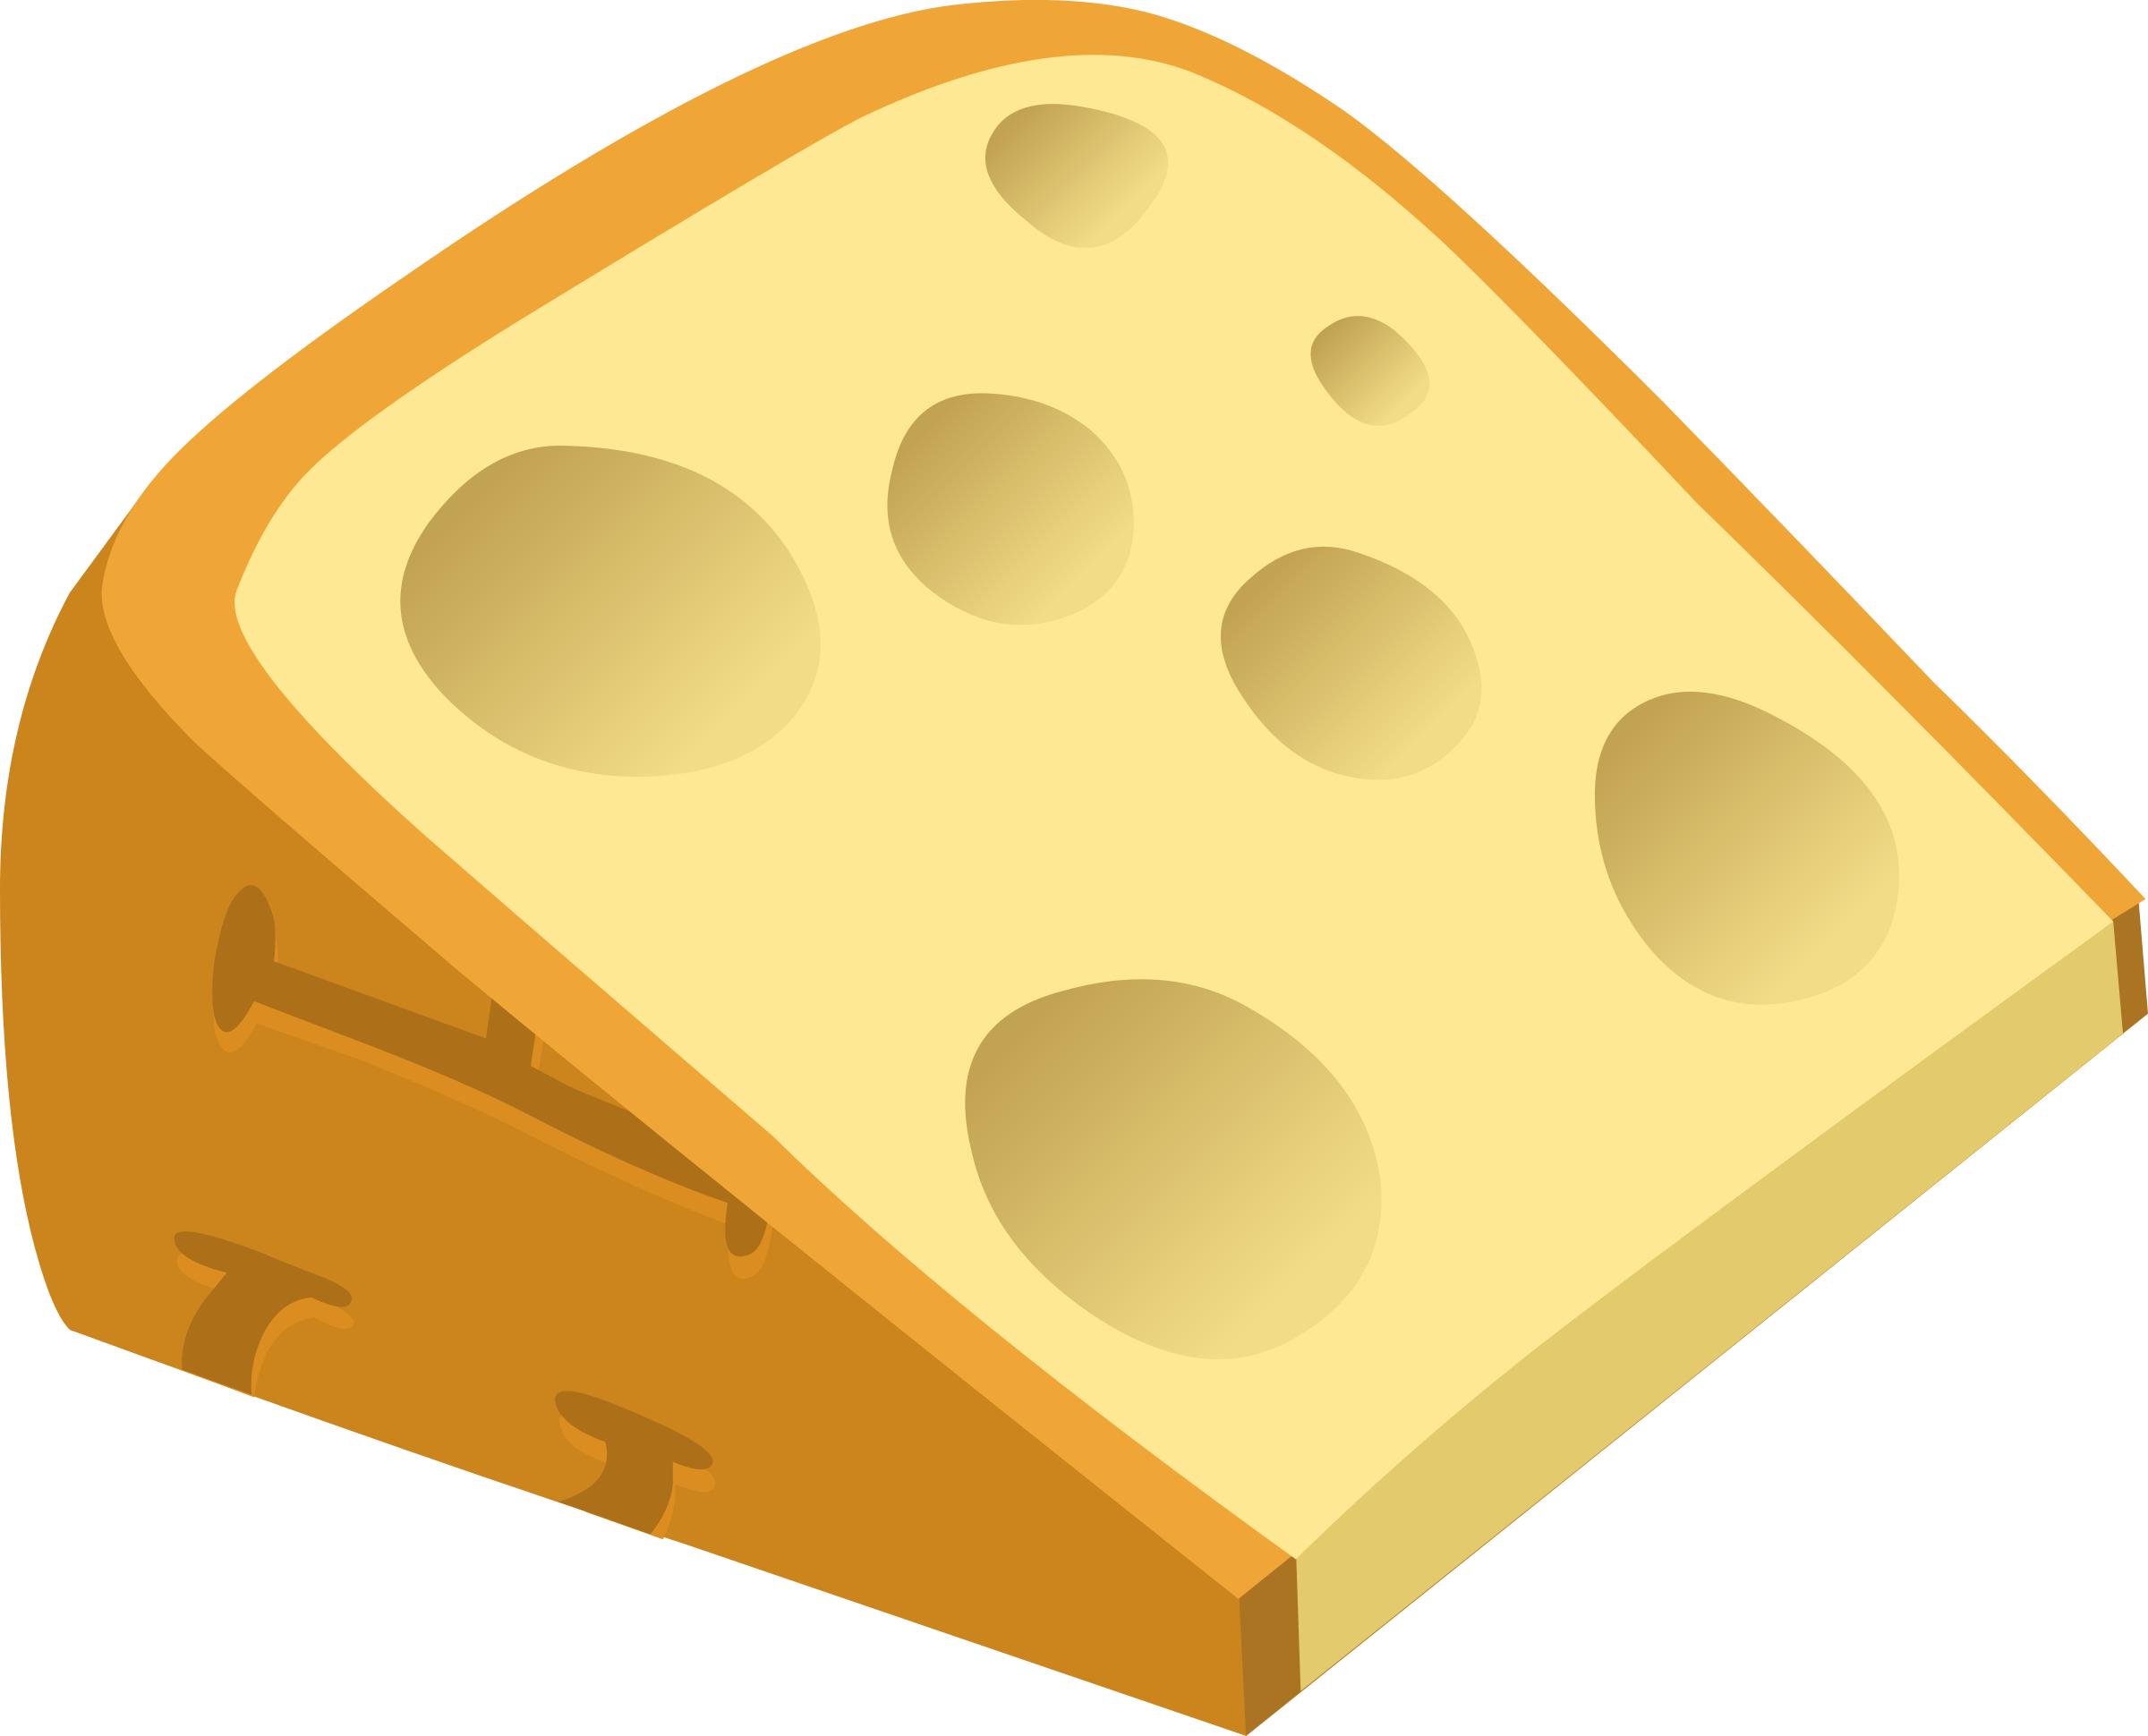 cheese clipart cheese plate